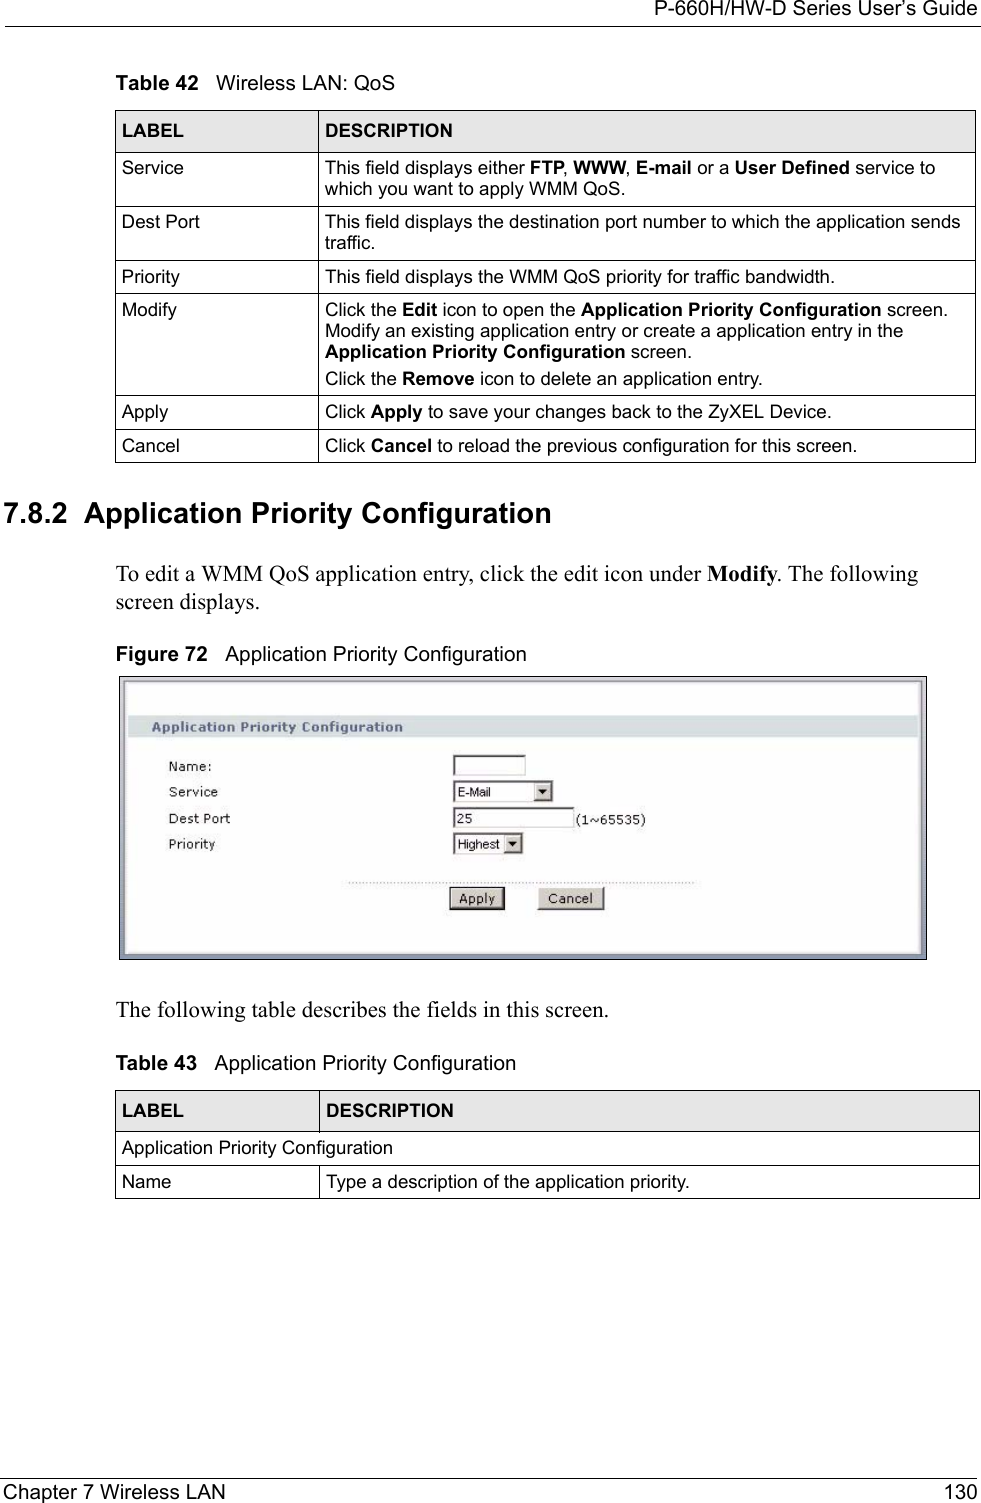 P-660H/HW-D Series User’s GuideChapter 7 Wireless LAN 1307.8.2  Application Priority ConfigurationTo edit a WMM QoS application entry, click the edit icon under Modify. The following screen displays.Figure 72   Application Priority ConfigurationThe following table describes the fields in this screen.Service This field displays either FTP, WWW, E-mail or a User Defined service to which you want to apply WMM QoS.Dest Port This field displays the destination port number to which the application sends traffic.Priority This field displays the WMM QoS priority for traffic bandwidth.Modify Click the Edit icon to open the Application Priority Configuration screen. Modify an existing application entry or create a application entry in the Application Priority Configuration screen.Click the Remove icon to delete an application entry.Apply Click Apply to save your changes back to the ZyXEL Device.Cancel Click Cancel to reload the previous configuration for this screen.Table 42   Wireless LAN: QoSLABEL DESCRIPTIONTable 43   Application Priority ConfigurationLABEL DESCRIPTIONApplication Priority ConfigurationName Type a description of the application priority.